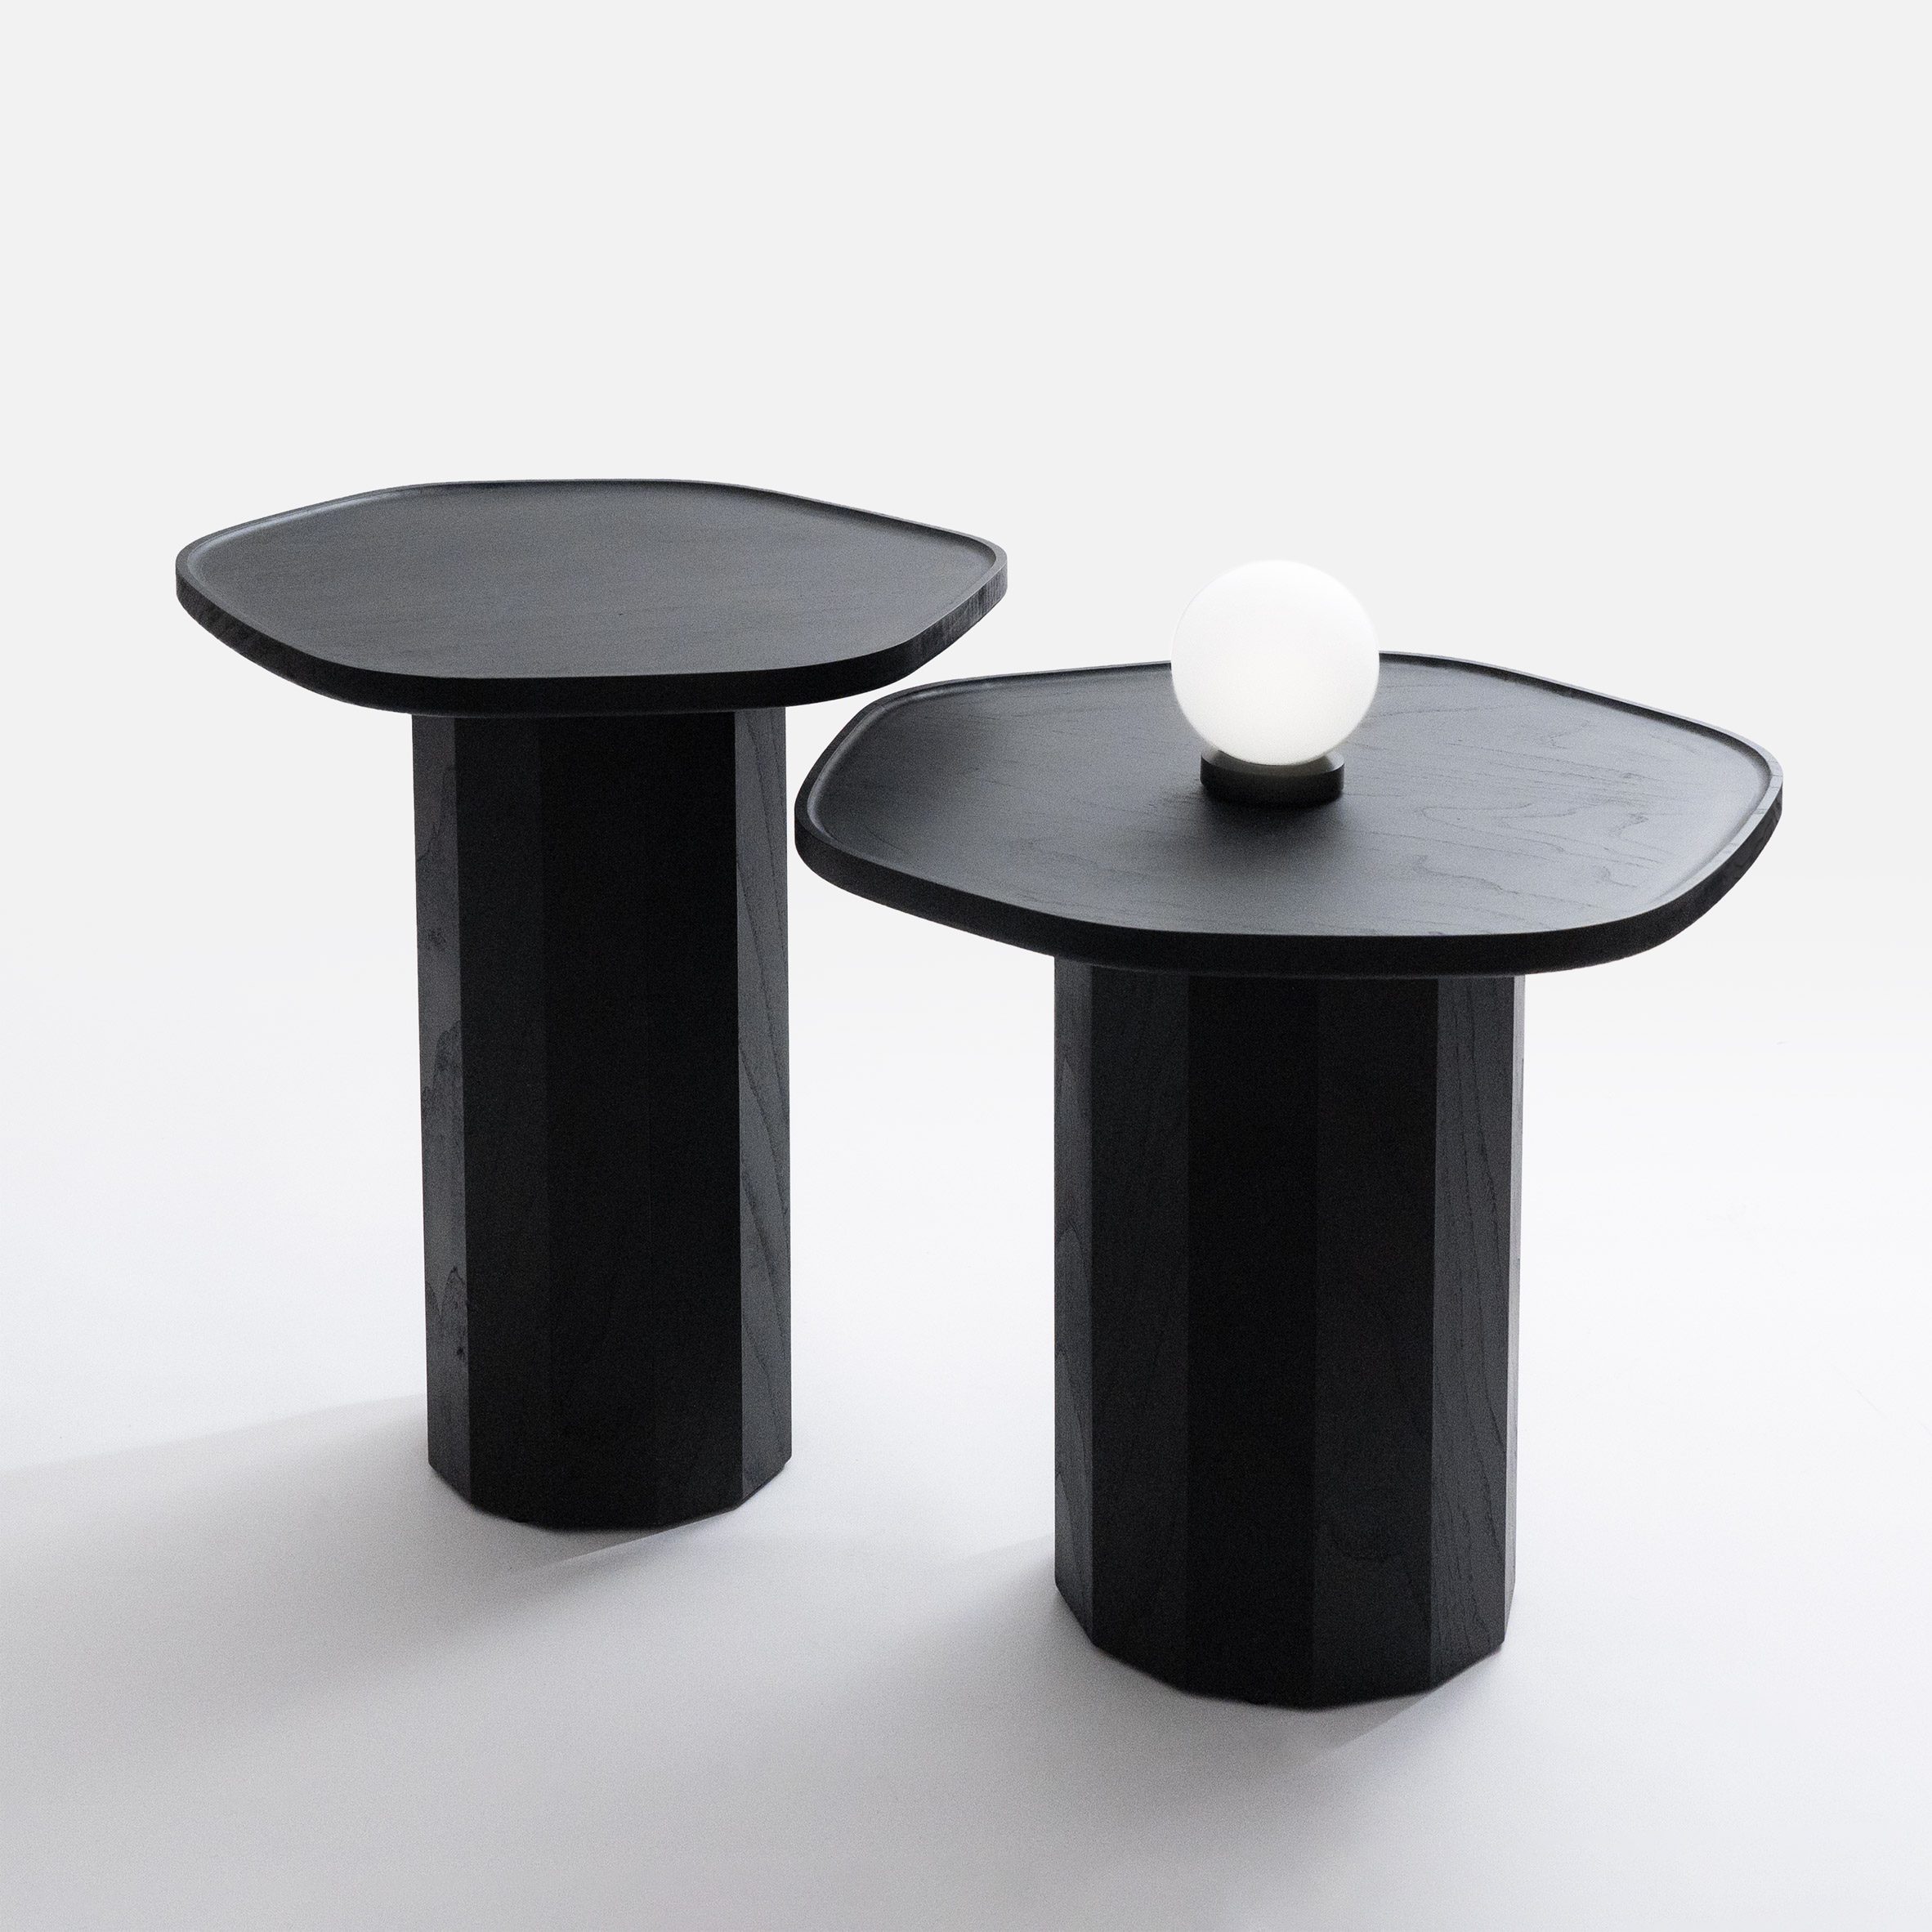 Les(s) collection by Studio WA+CH